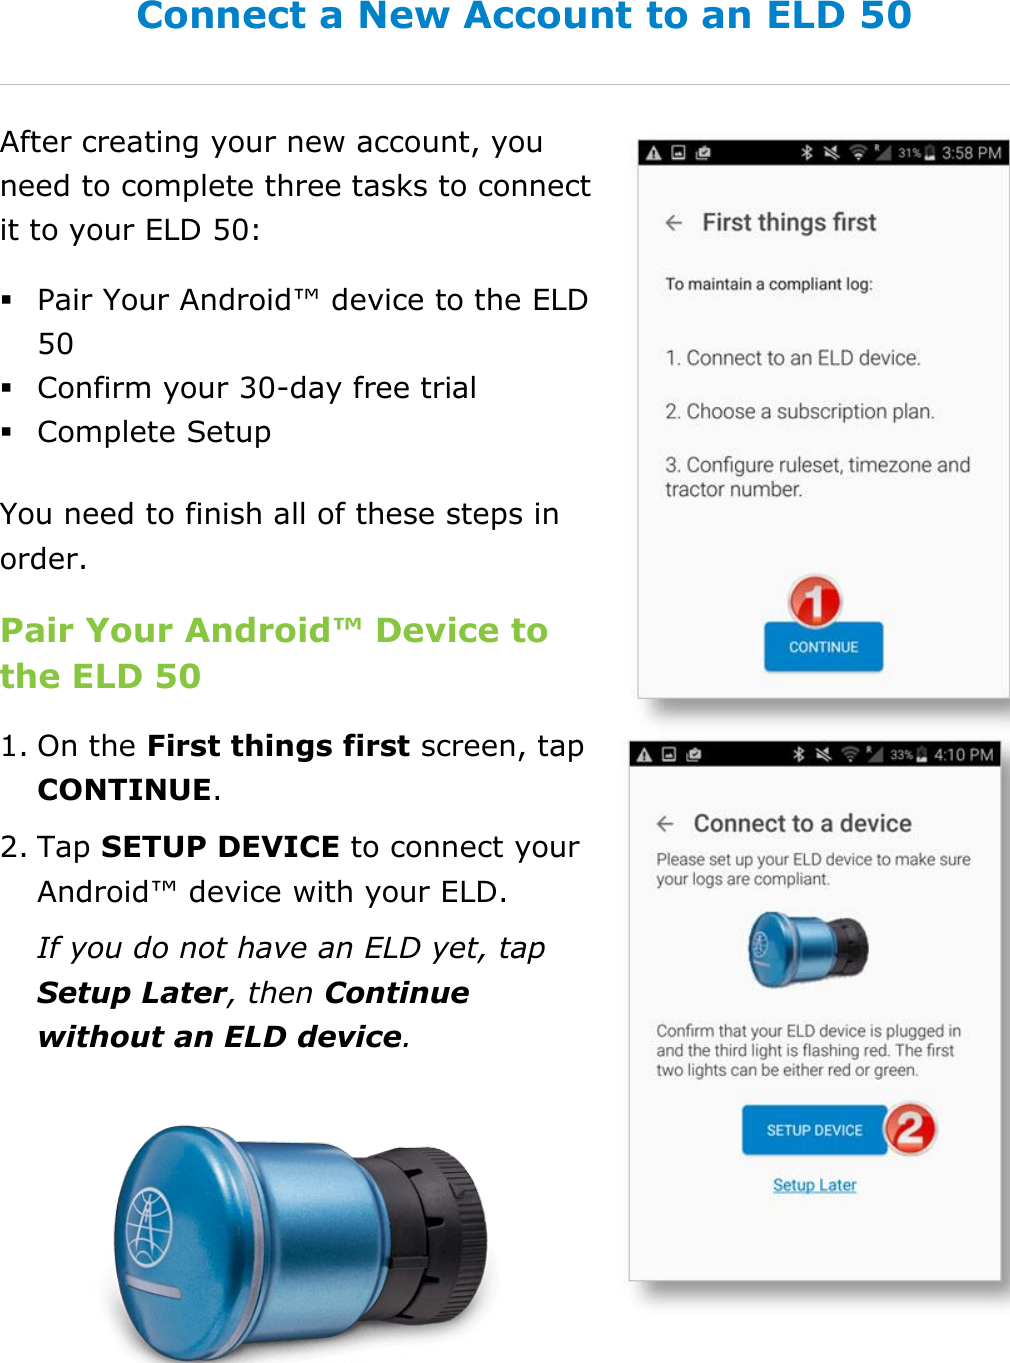 Set My Duty Status DriverConnect User Guide  10 © 2016-2017, Rand McNally, Inc. Connect a New Account to an ELD 50 After creating your new account, you need to complete three tasks to connect it to your ELD 50:  Pair Your Android™ device to the ELD 50  Confirm your 30-day free trial  Complete Setup You need to finish all of these steps in order. Pair Your Android™ Device to the ELD 50 1. On the First things first screen, tap CONTINUE. 2. Tap SETUP DEVICE to connect your Android™ device with your ELD. If you do not have an ELD yet, tap Setup Later, then Continue without an ELD device.   